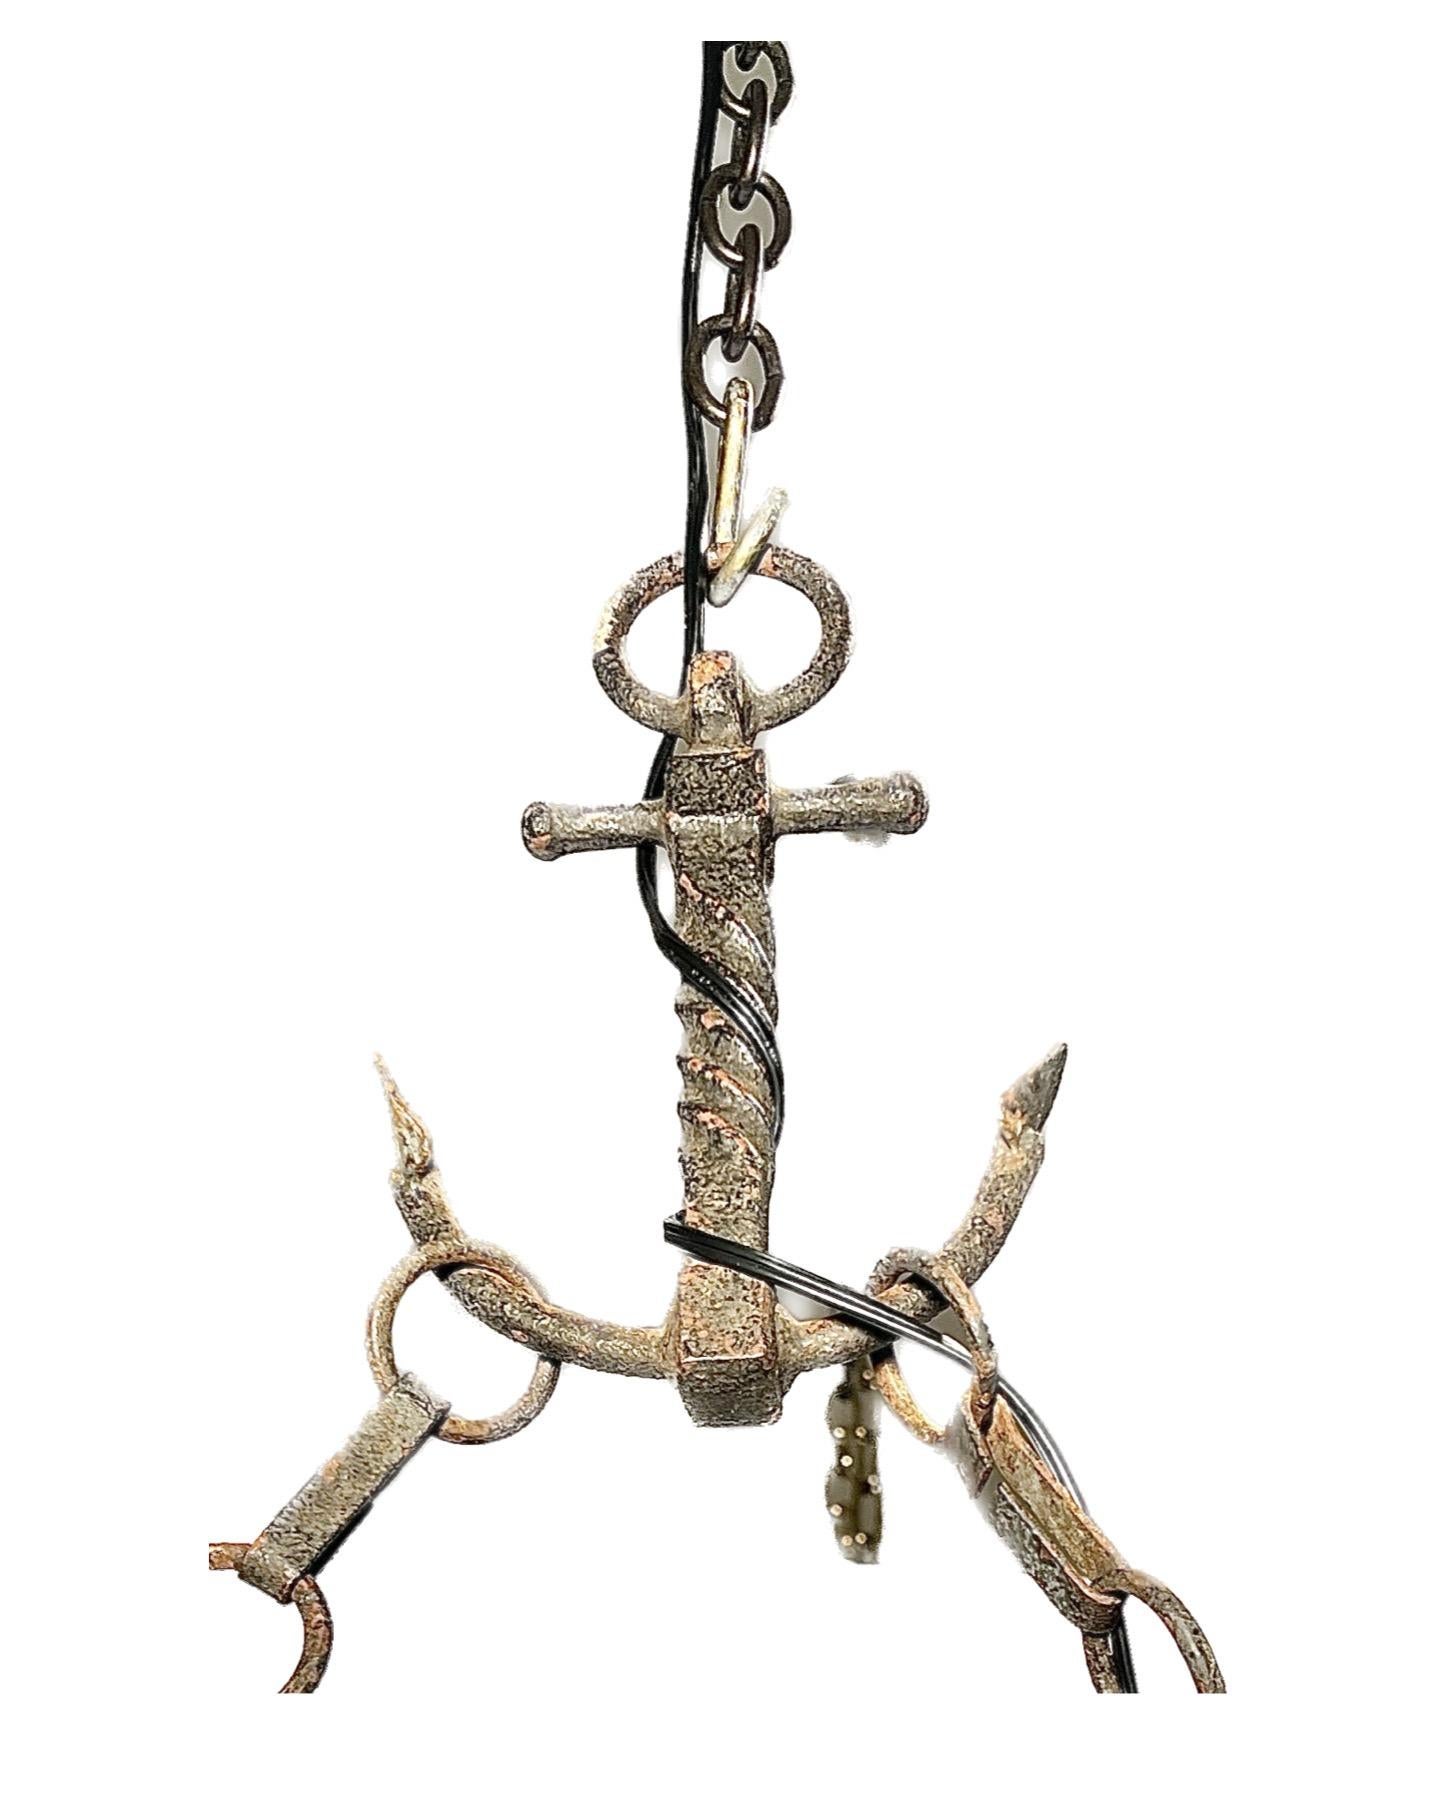 Antique French Iron Fixture in the Form of a Viking Ship circa 1890 For Sale 2